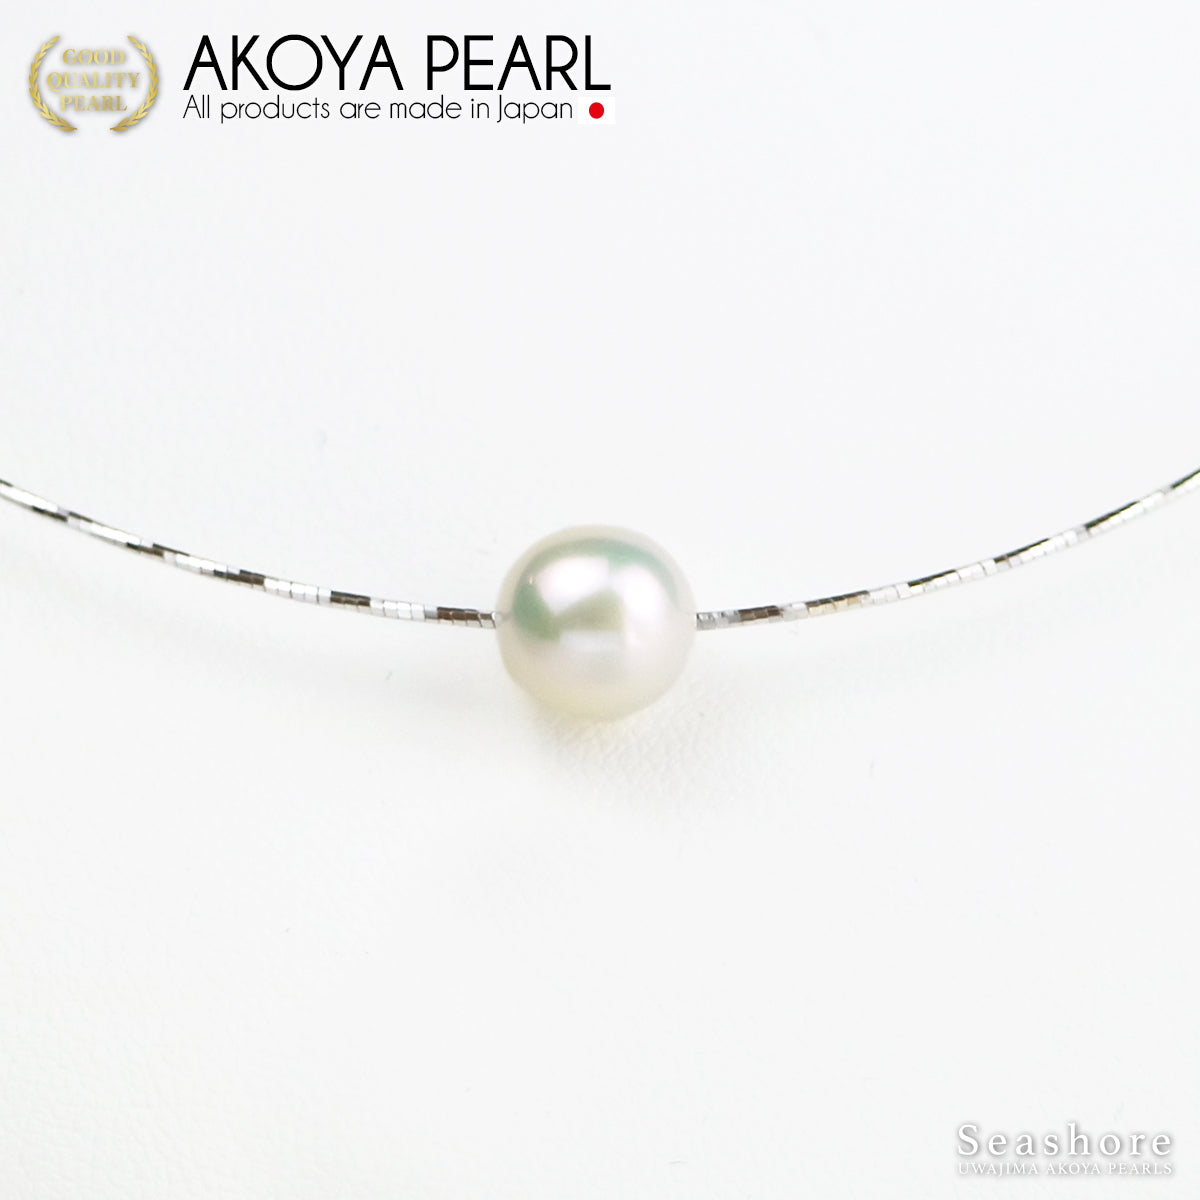 Akoya Pearl Omega Pearl Necklace Choker Women's [8.0-9.0mm] SV925 Shape Memory Wire Silver / Gold [2 Colors]